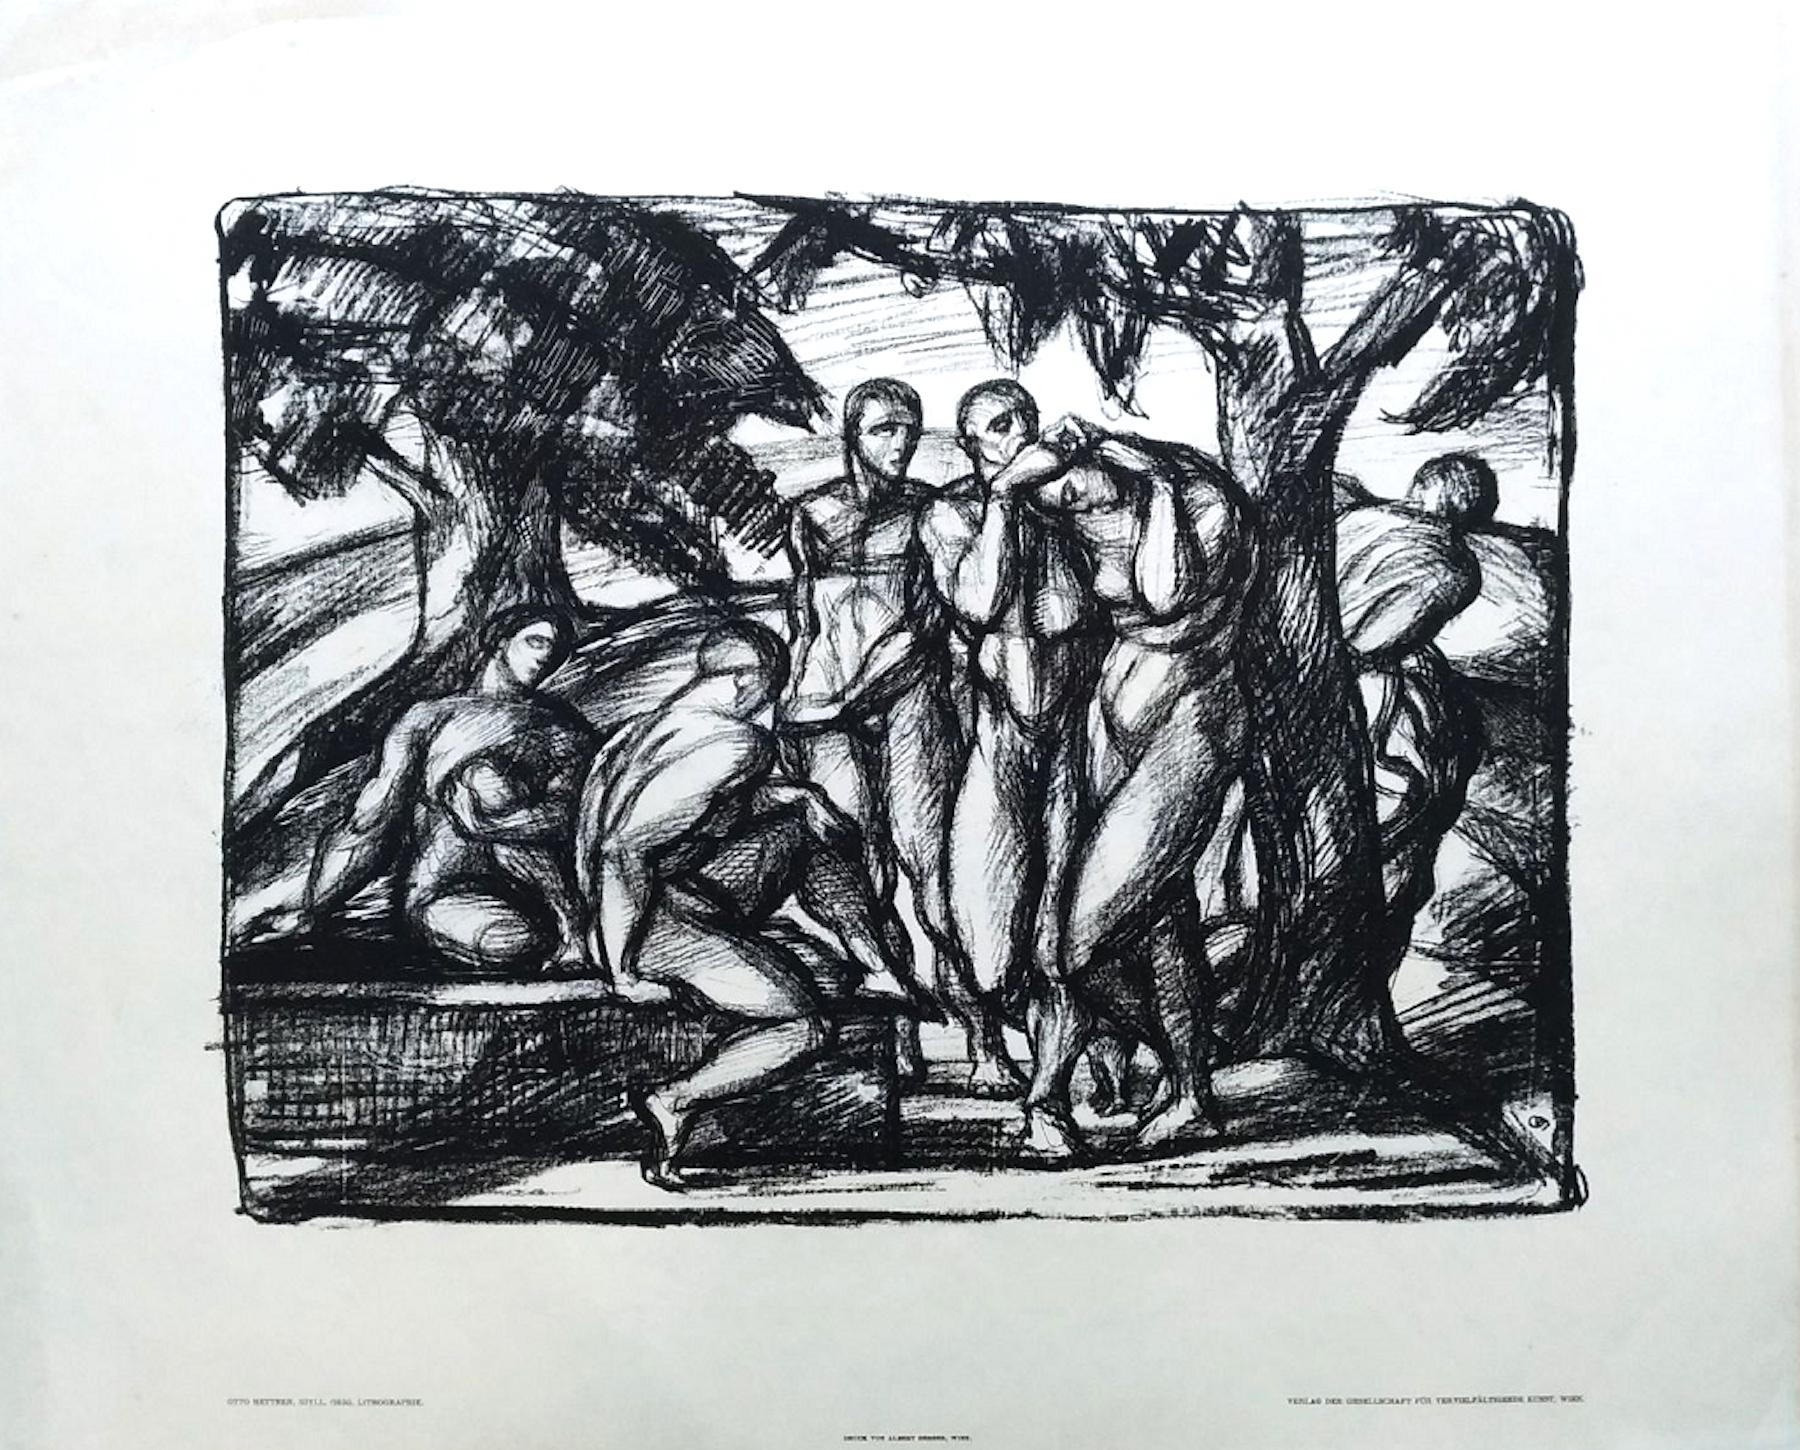 Idyll is an original lithograph realized by Otto Hettner in 1917. The monogram is present on plate on the lower right margin. Published by Paul Cassirer. The lithograph is part of a portfolio including five graphic works realized by different